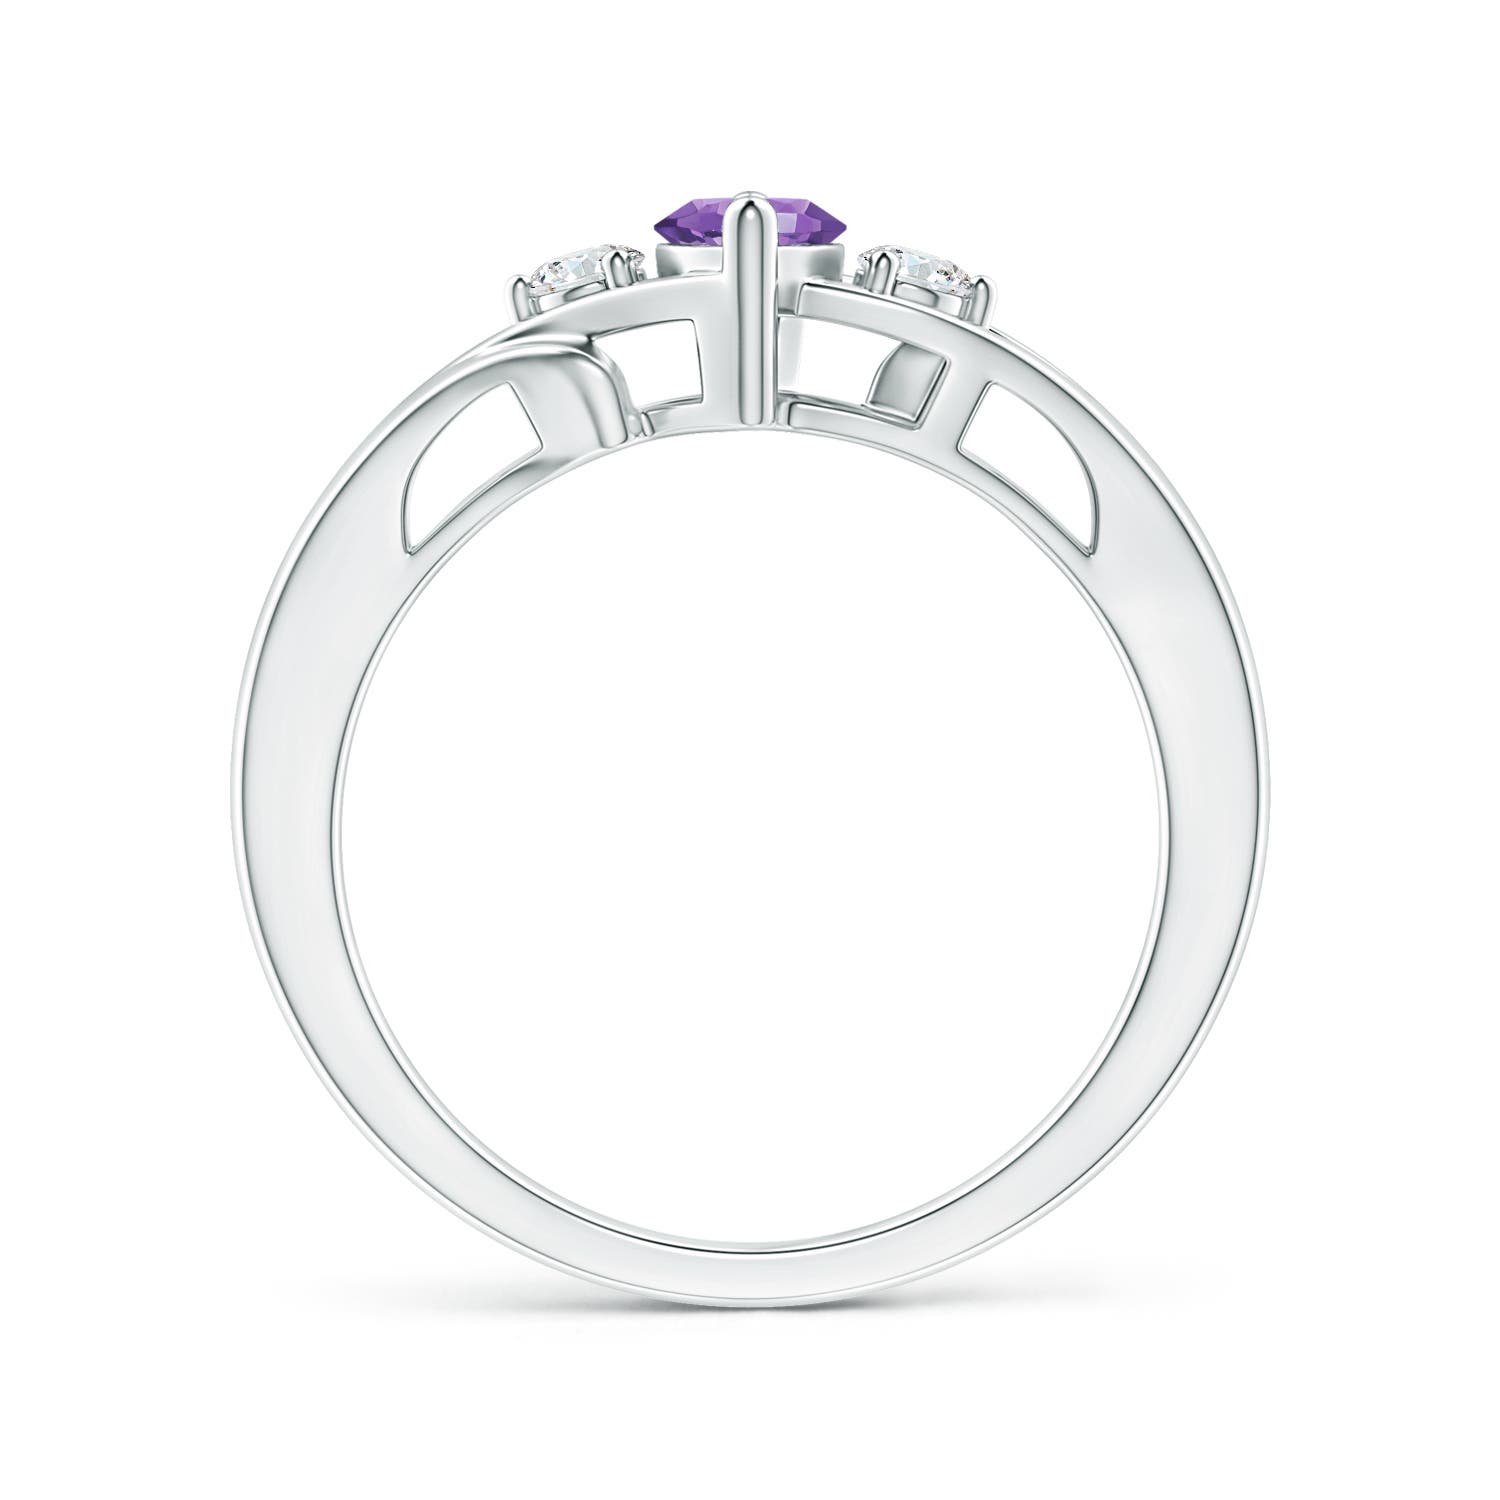 AA - Amethyst / 0.64 CT / 14 KT White Gold